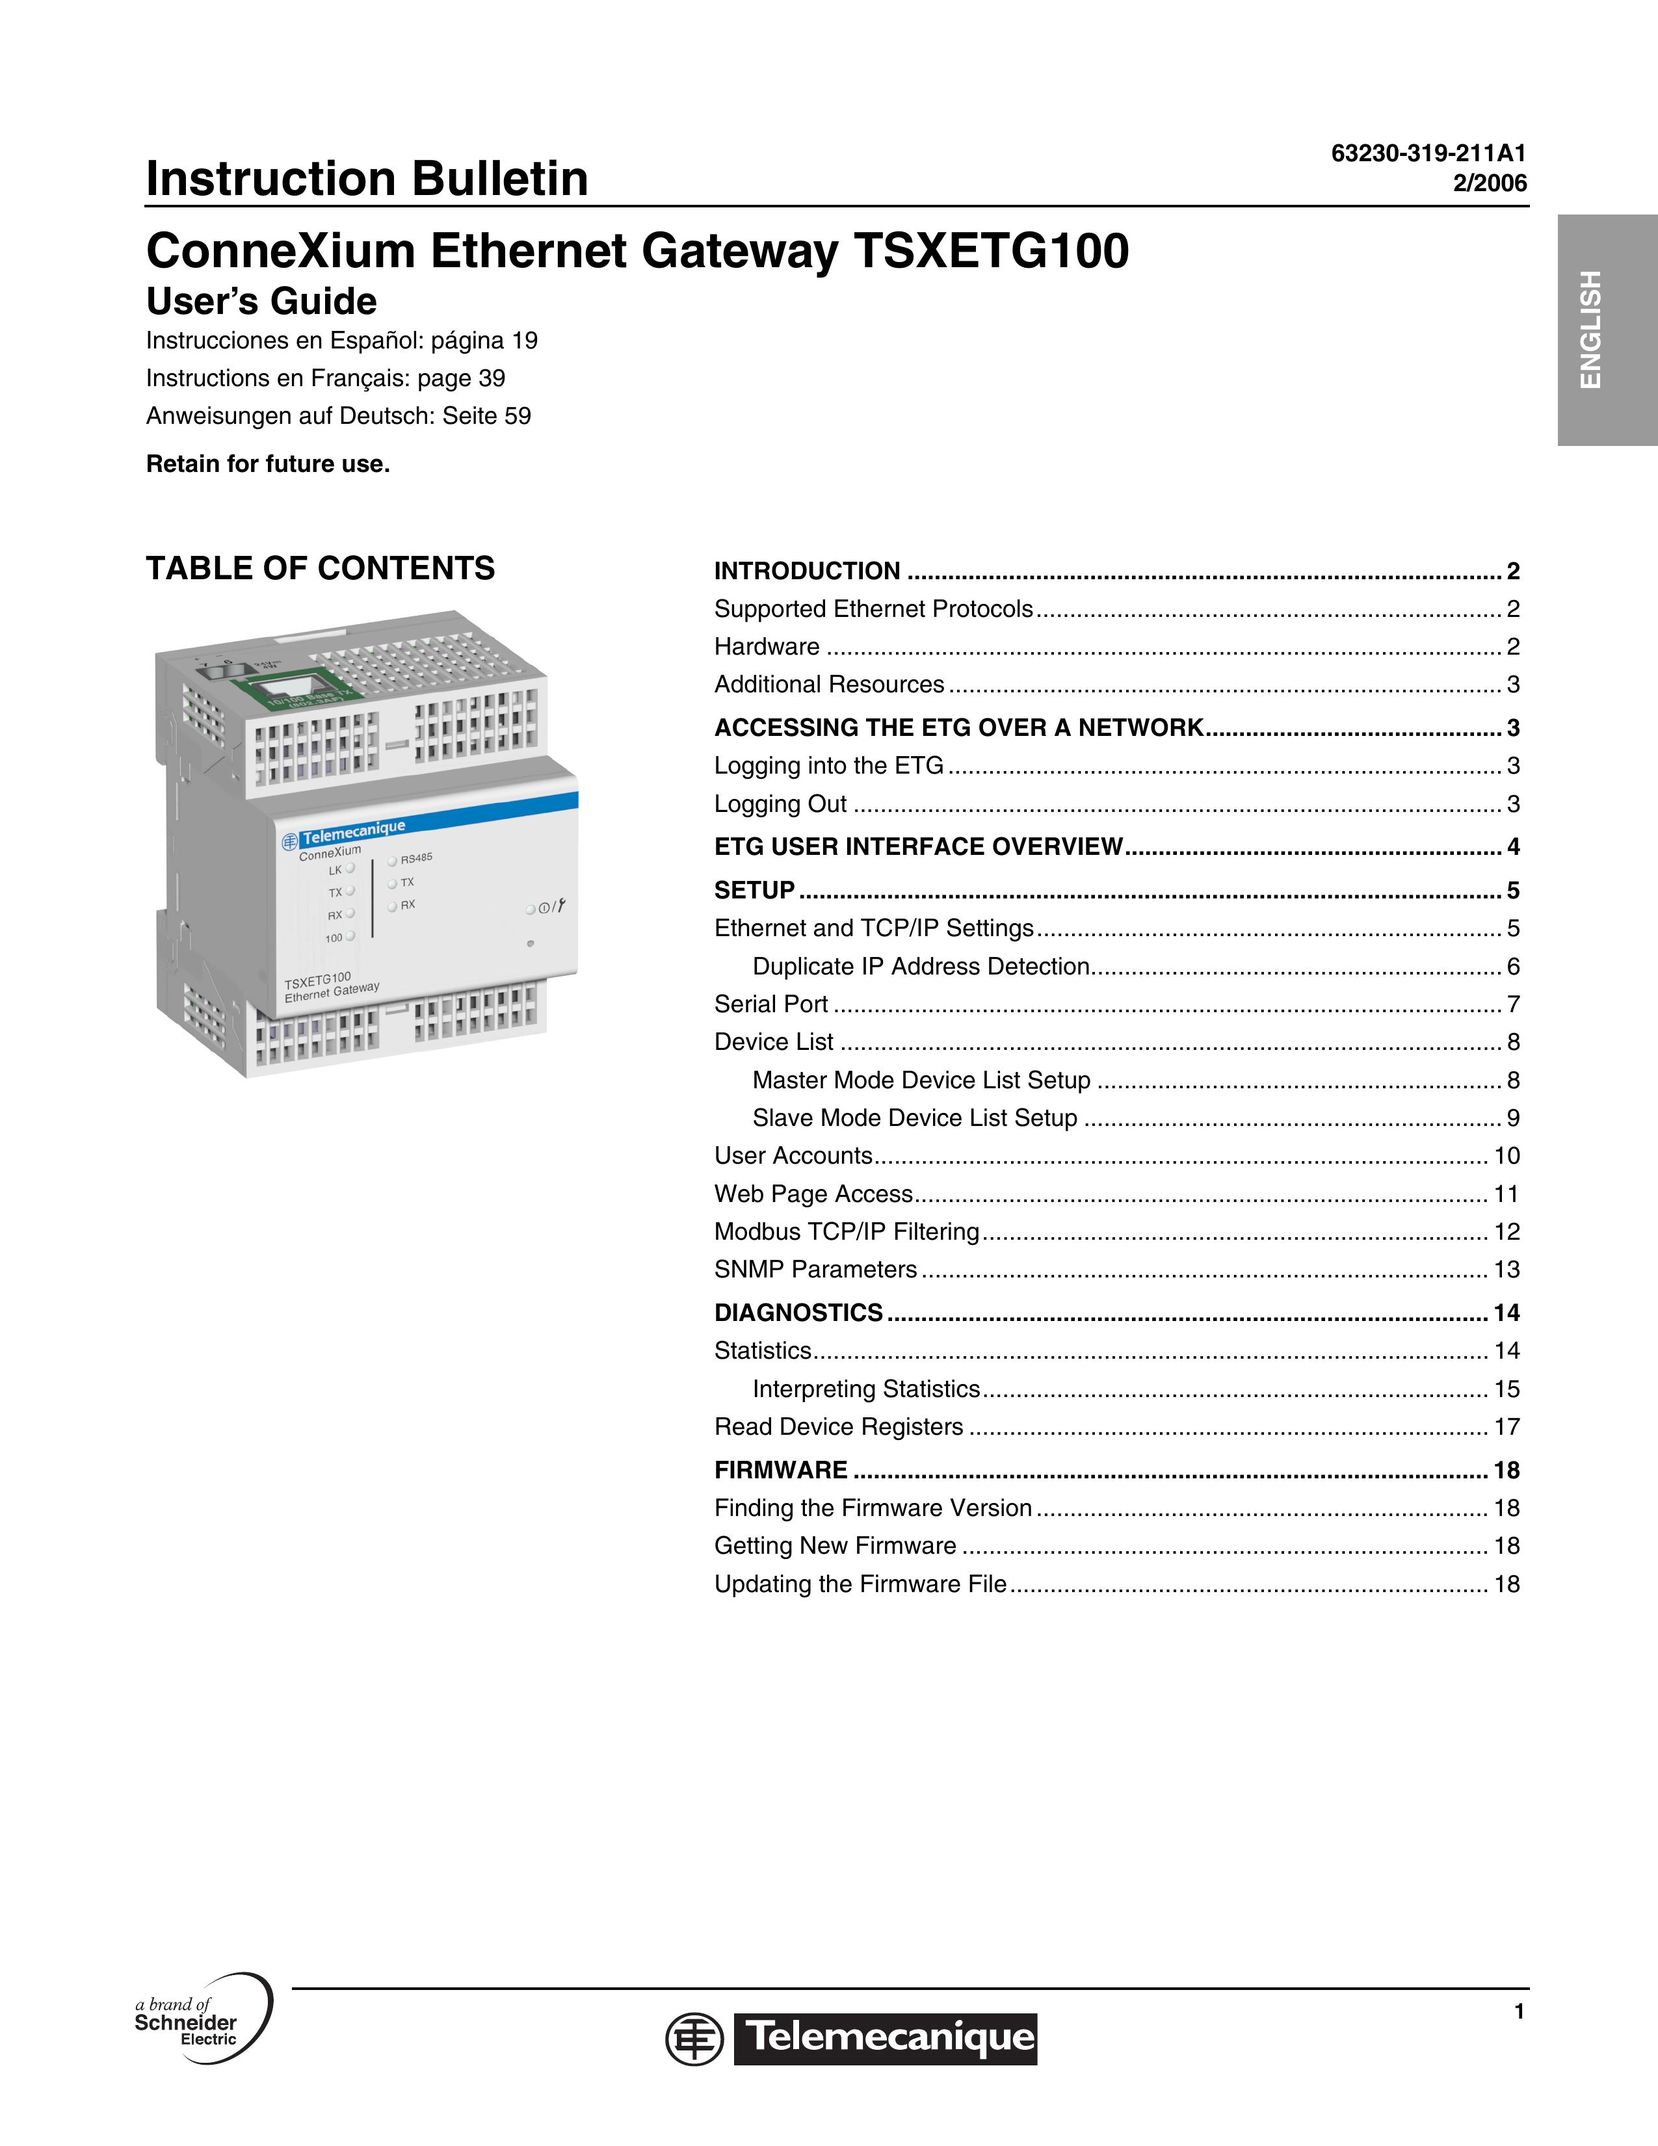 Schneider Electric TSXETG100 Network Router User Manual